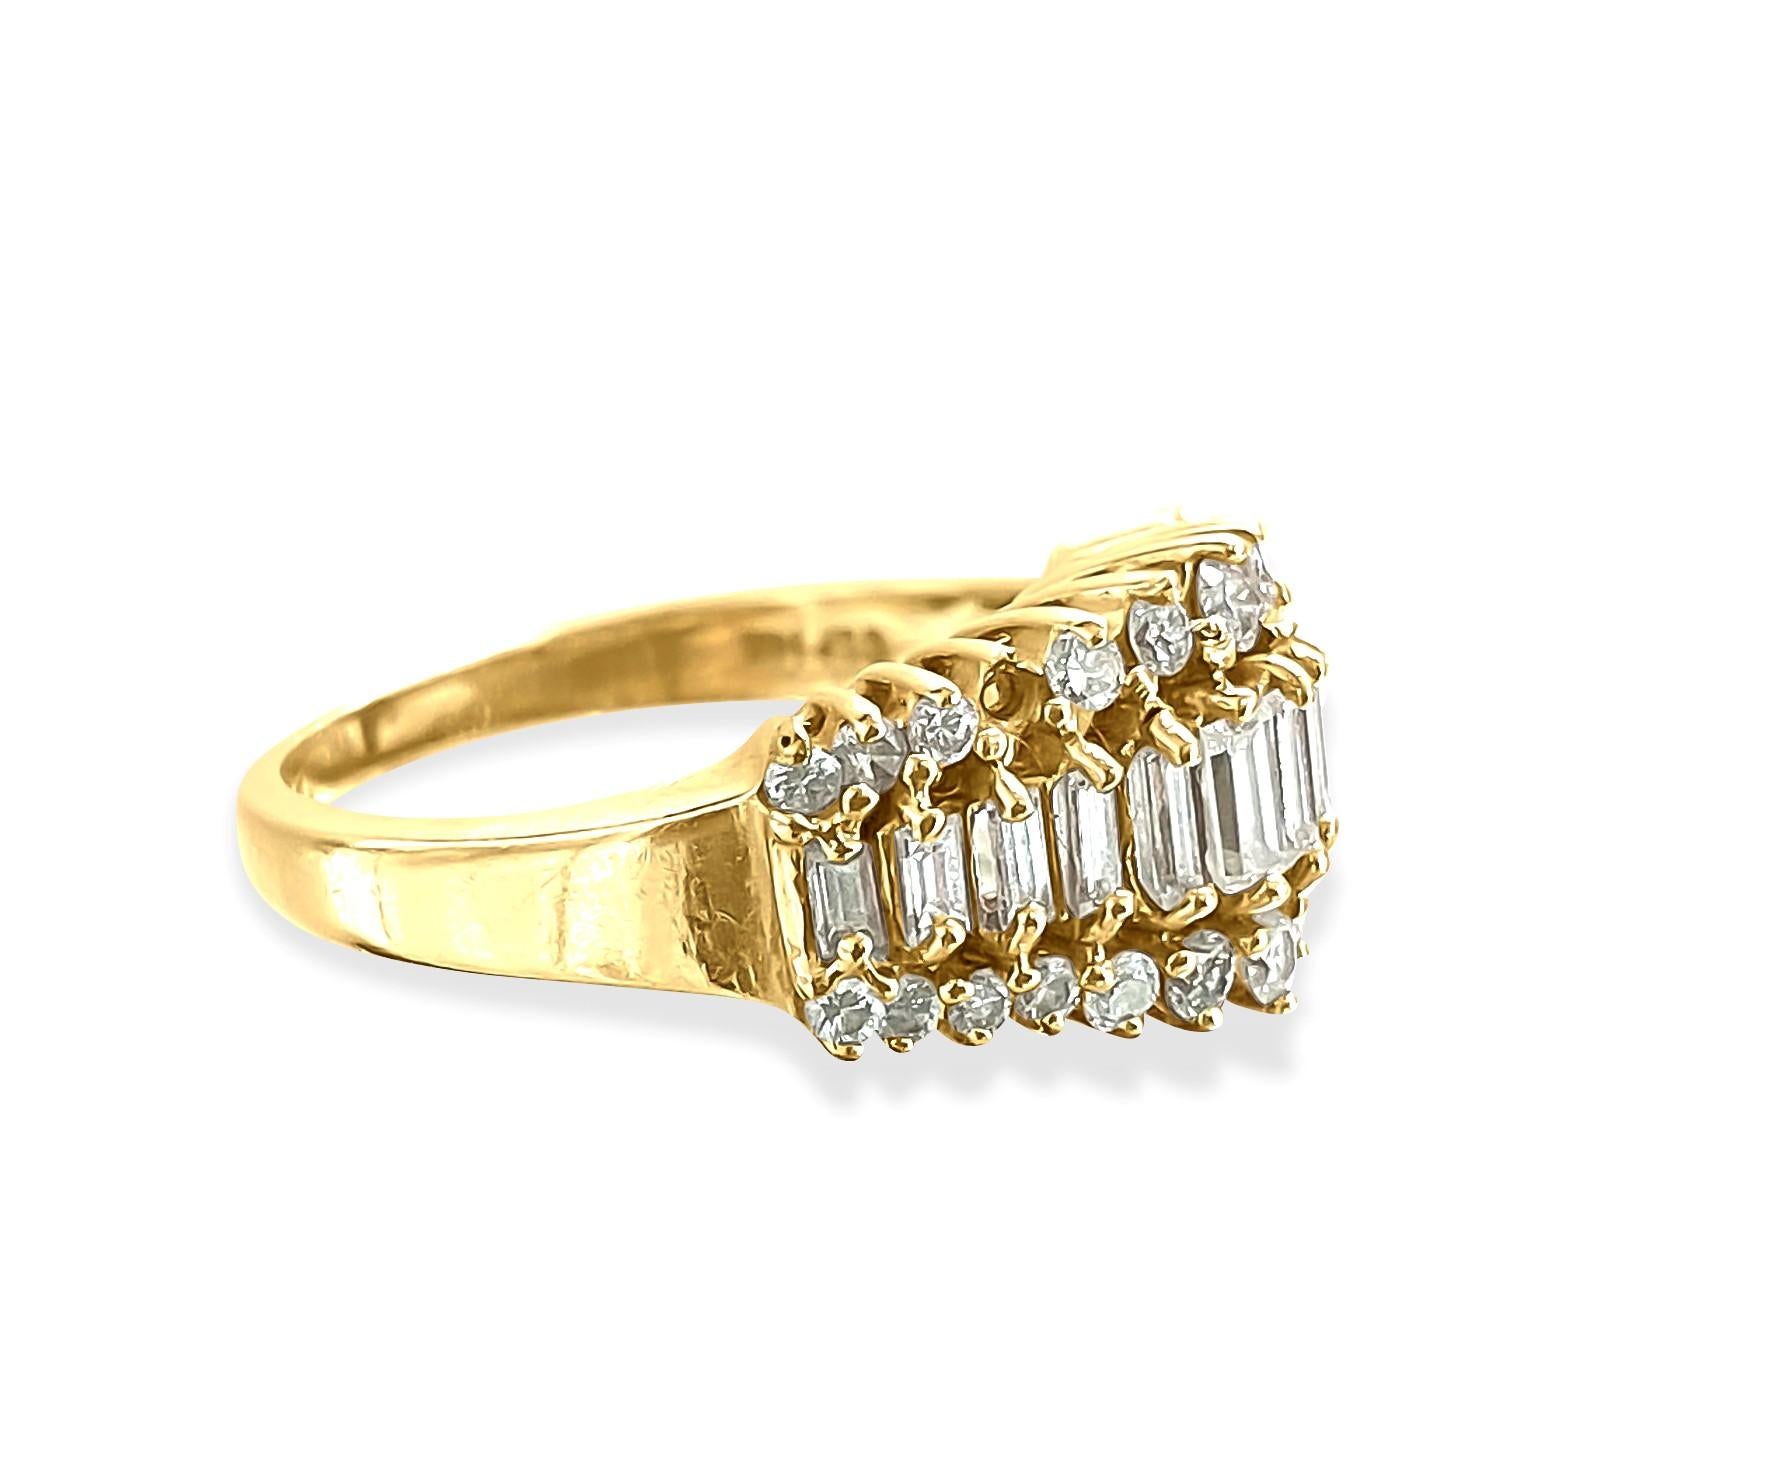 Medieval 1.00 Carat Diamond and Yellow Gold Engagement Ring For Sale